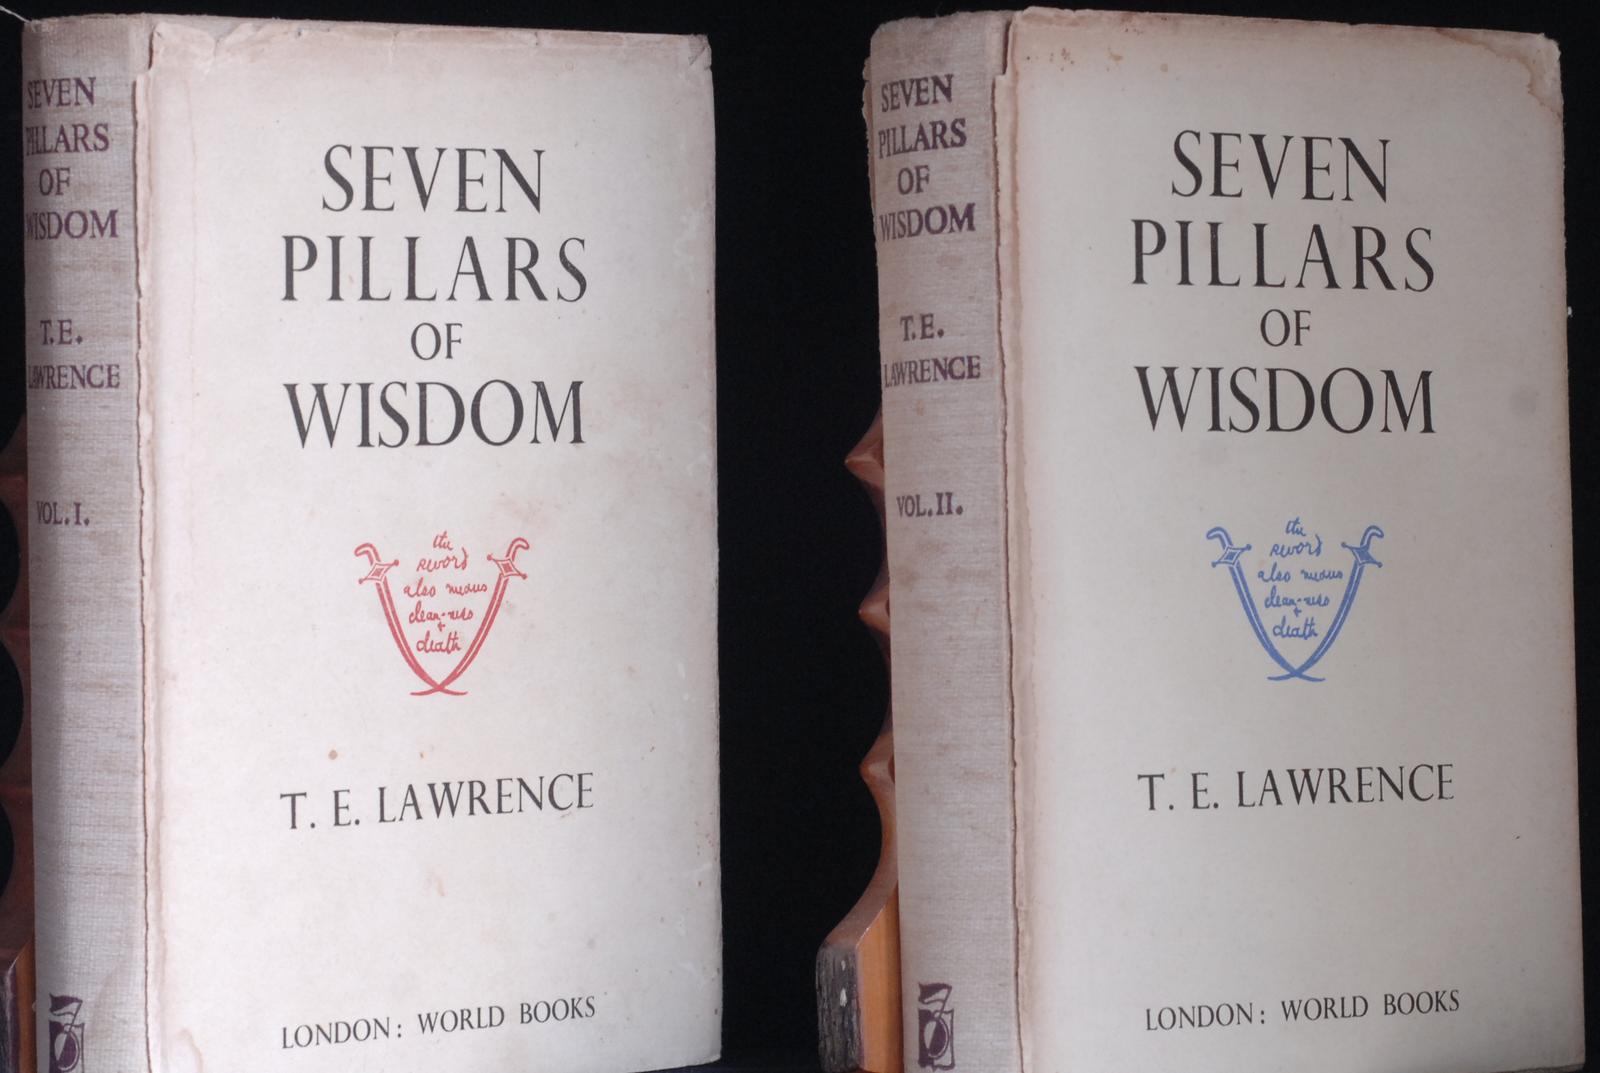 mbb005933b_-_Lawrence_T_E_-_The_Seven_Pillars_Of_Wisdom_-_Contains_Illustrations.jpg